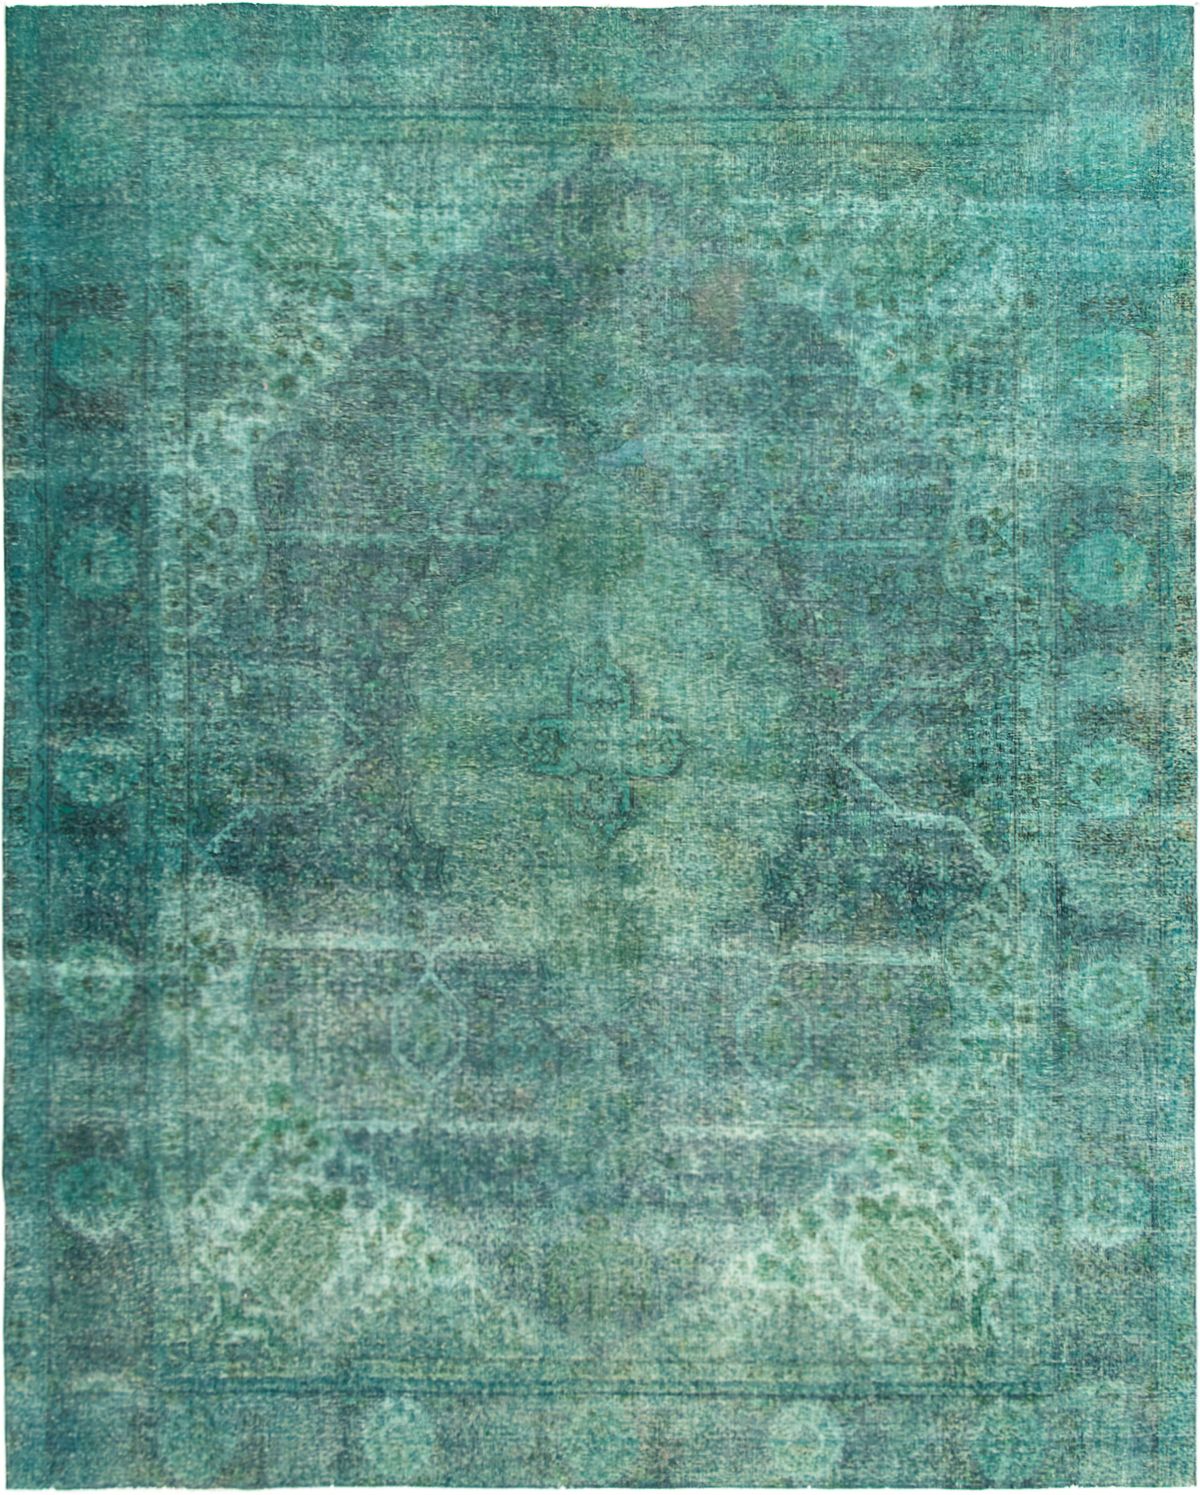 Hand-knotted Color Transition Teal Wool Rug 9'7" x 11'10" Size: 9'7" x 11'10"  